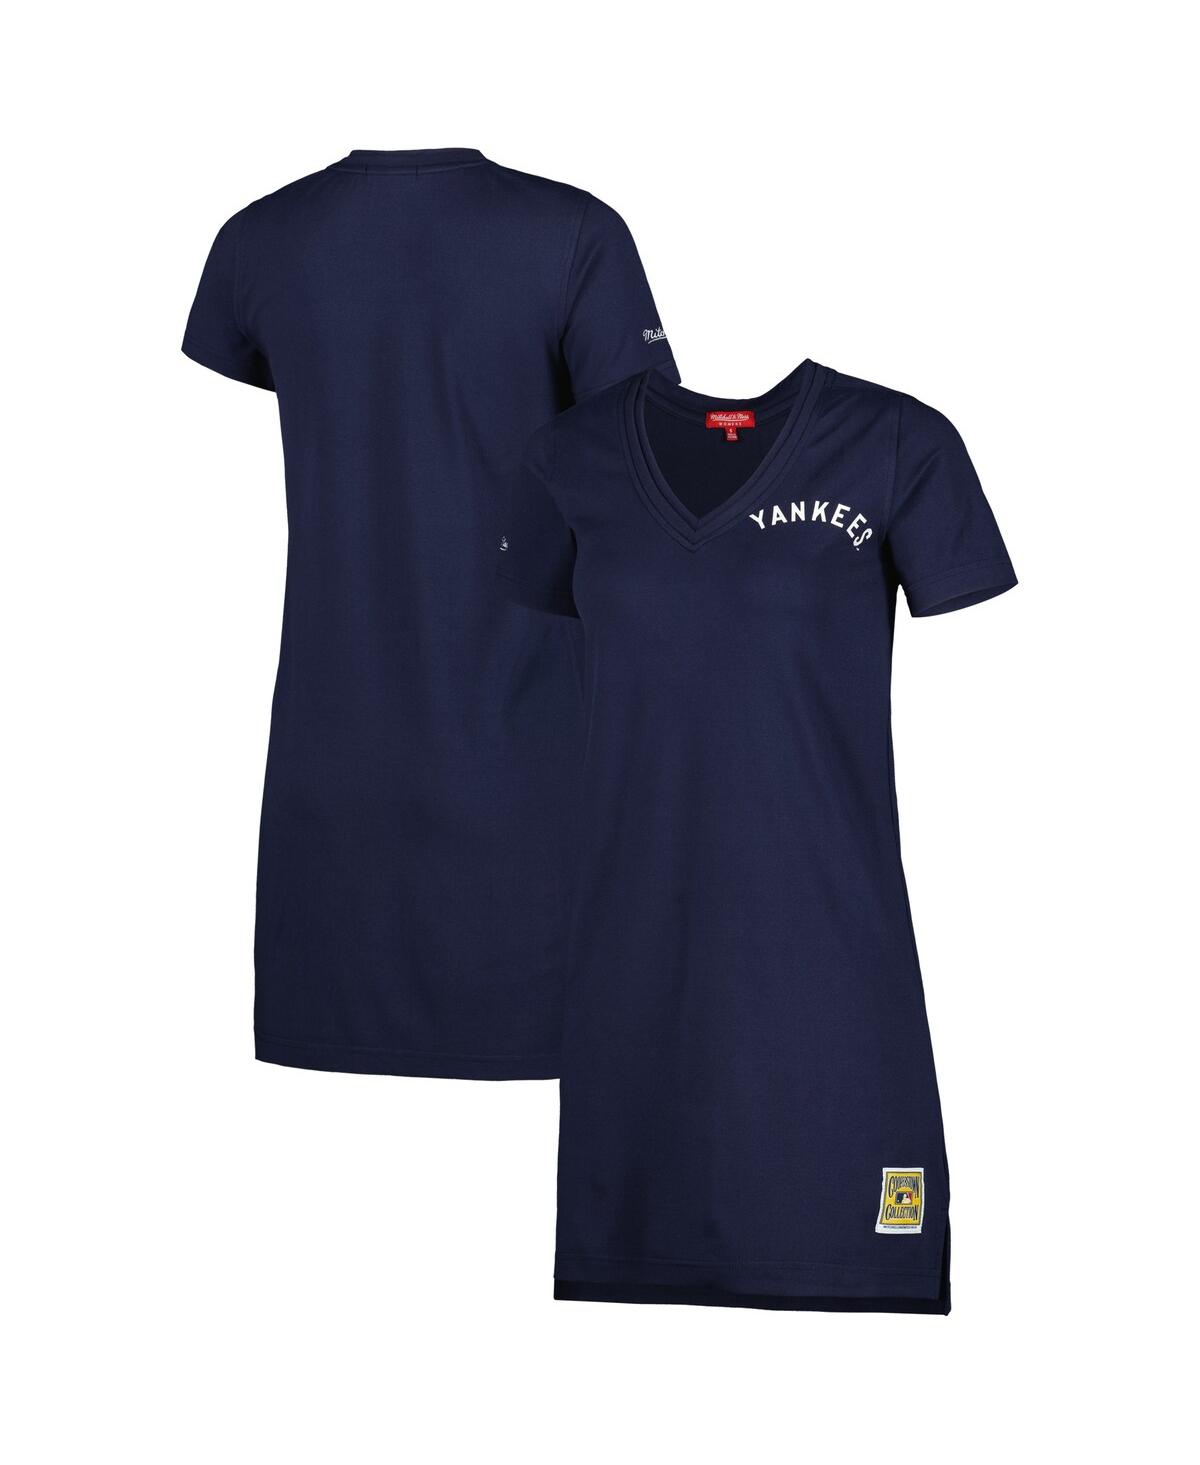 Shop Mitchell & Ness Women's  Navy Distressed New York Yankees Cooperstown Collection V-neck Dress